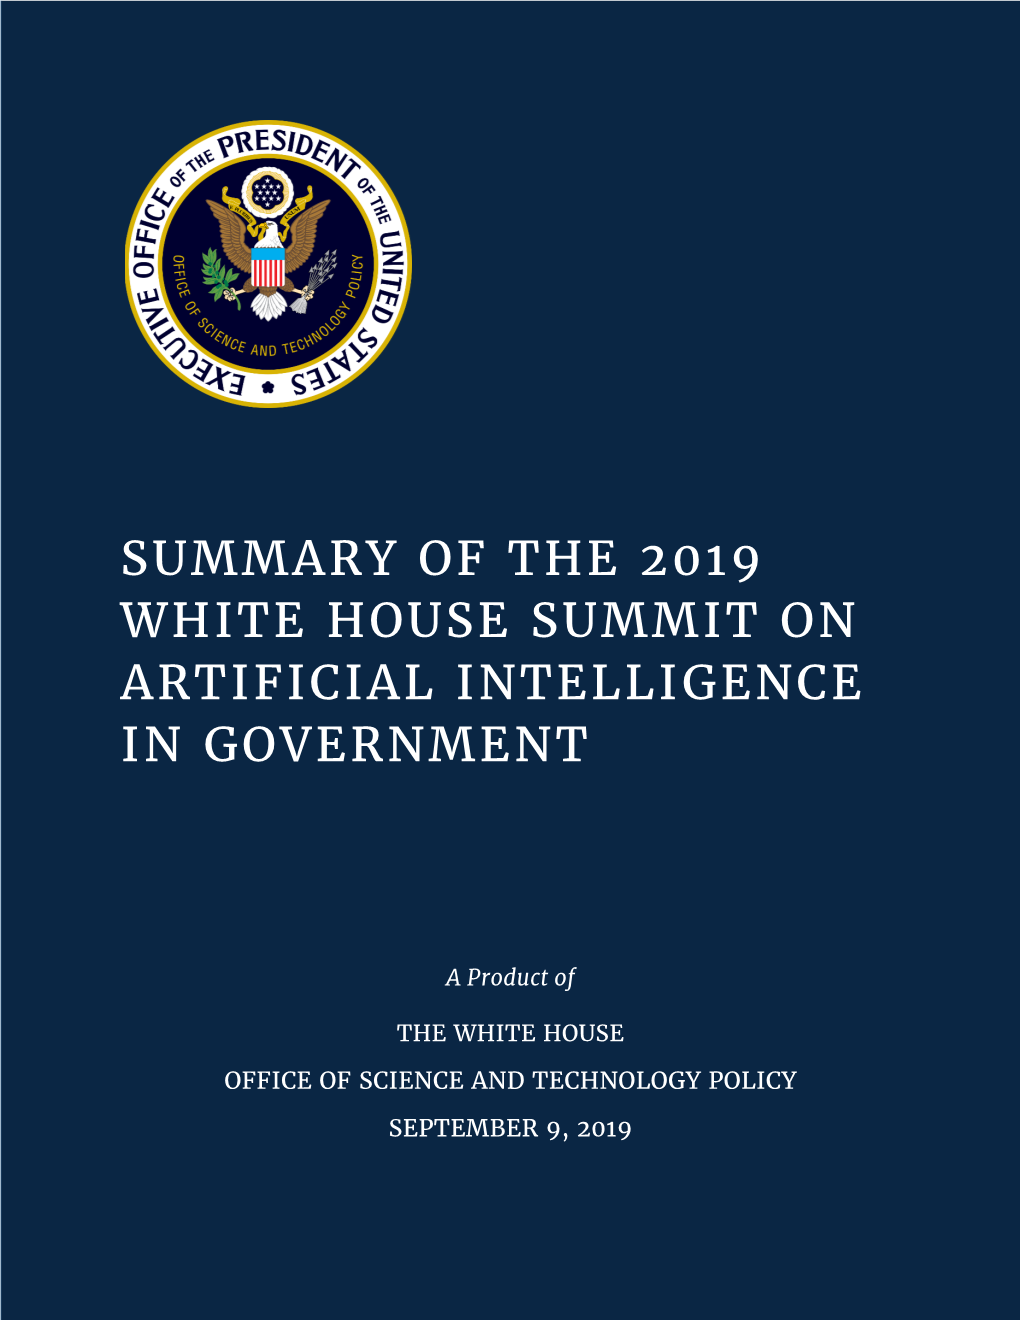 Summary of the 2019 White House Summit on Artificial Intelligence in Government